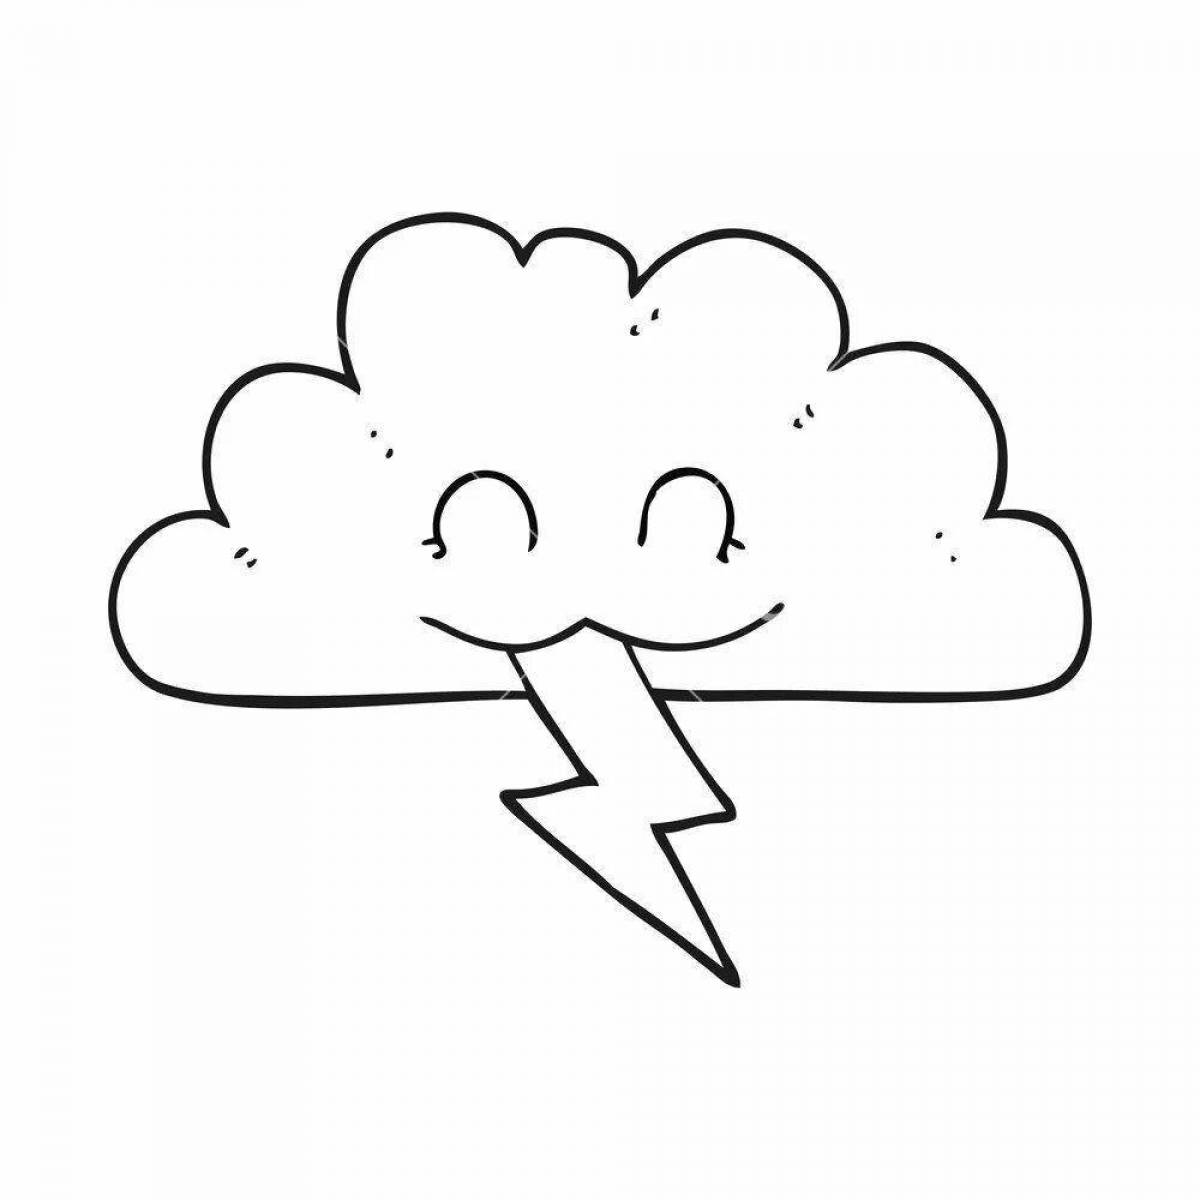 Glorious thunderstorm coloring pages for children